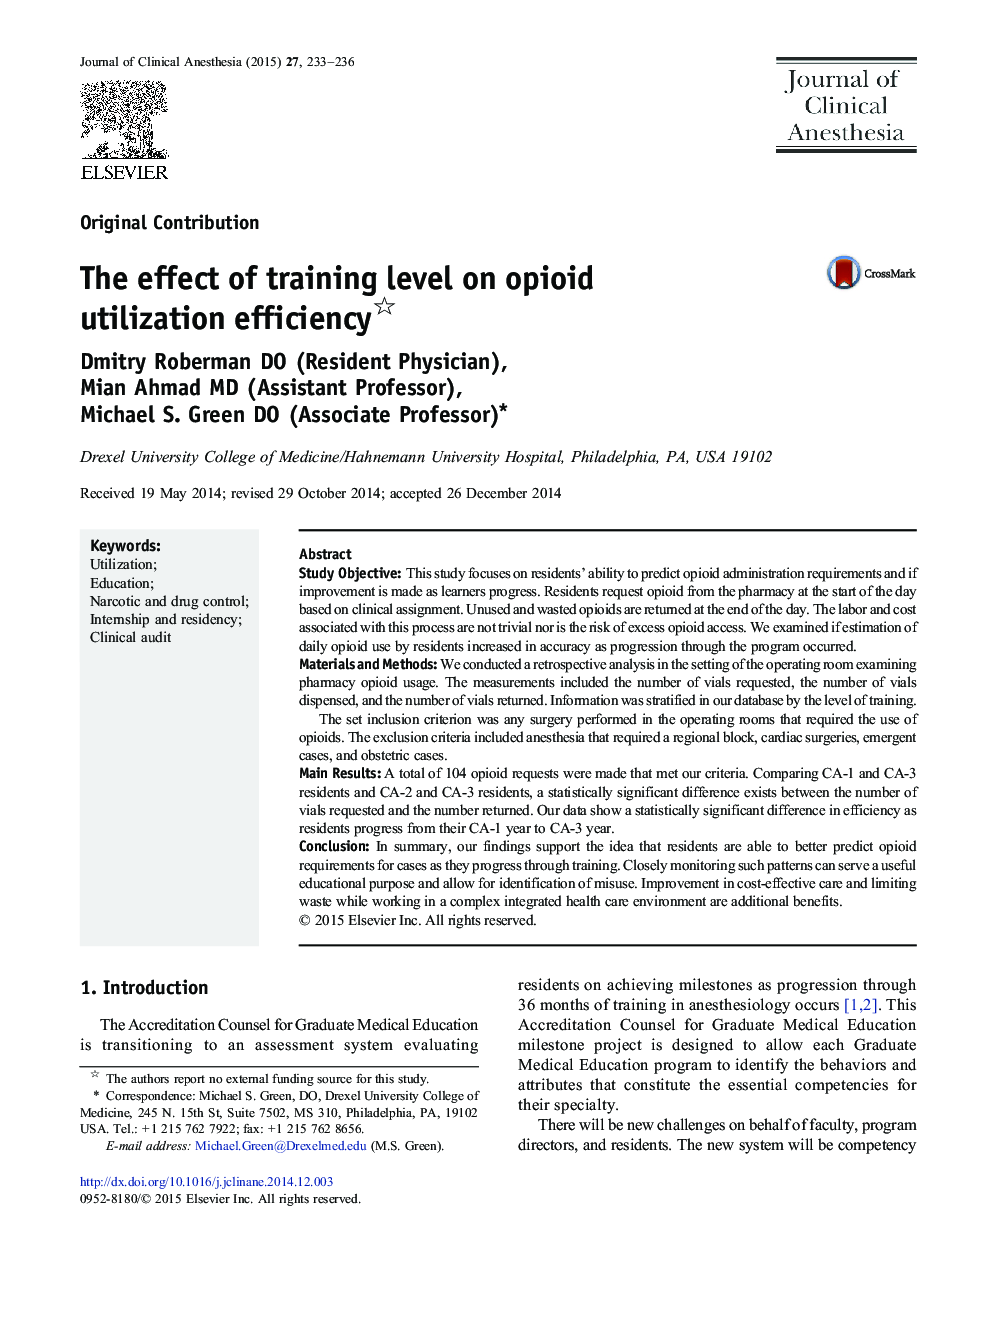 The effect of training level on opioid utilization efficiency 